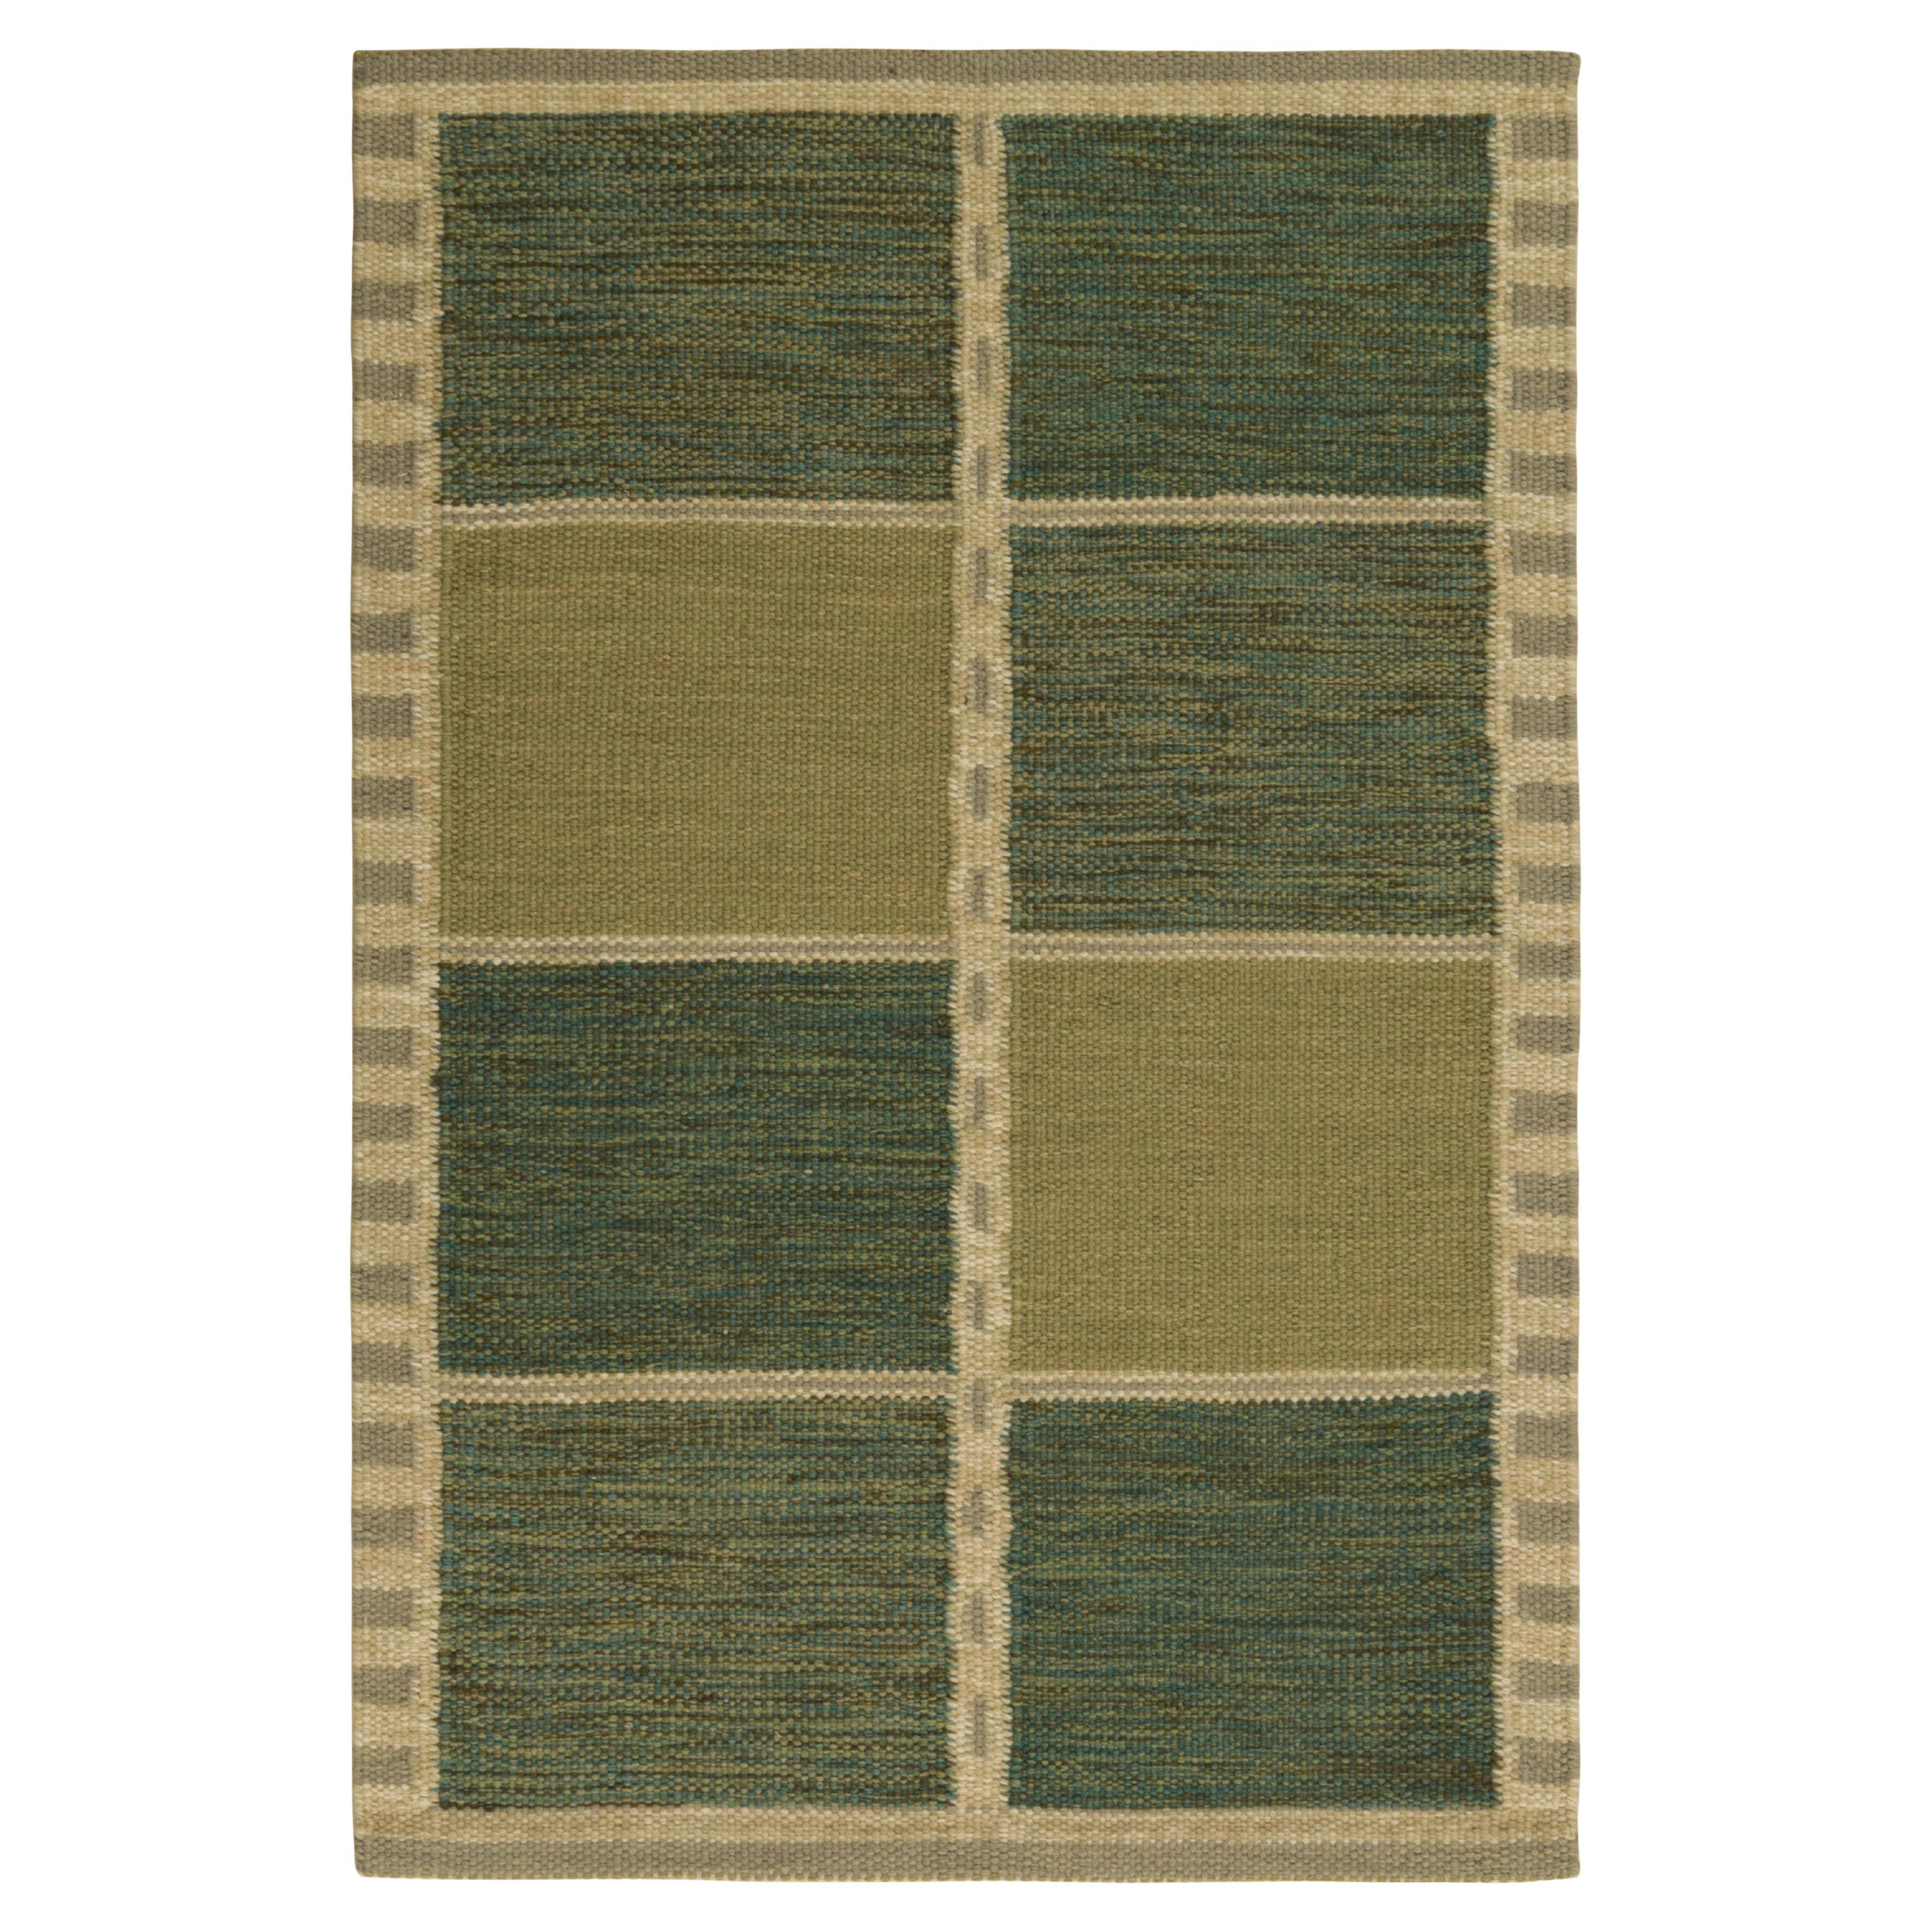 Rug & Kilim’s Scandinavian Style Rug in Green and Beige, with Geometric Patterns For Sale